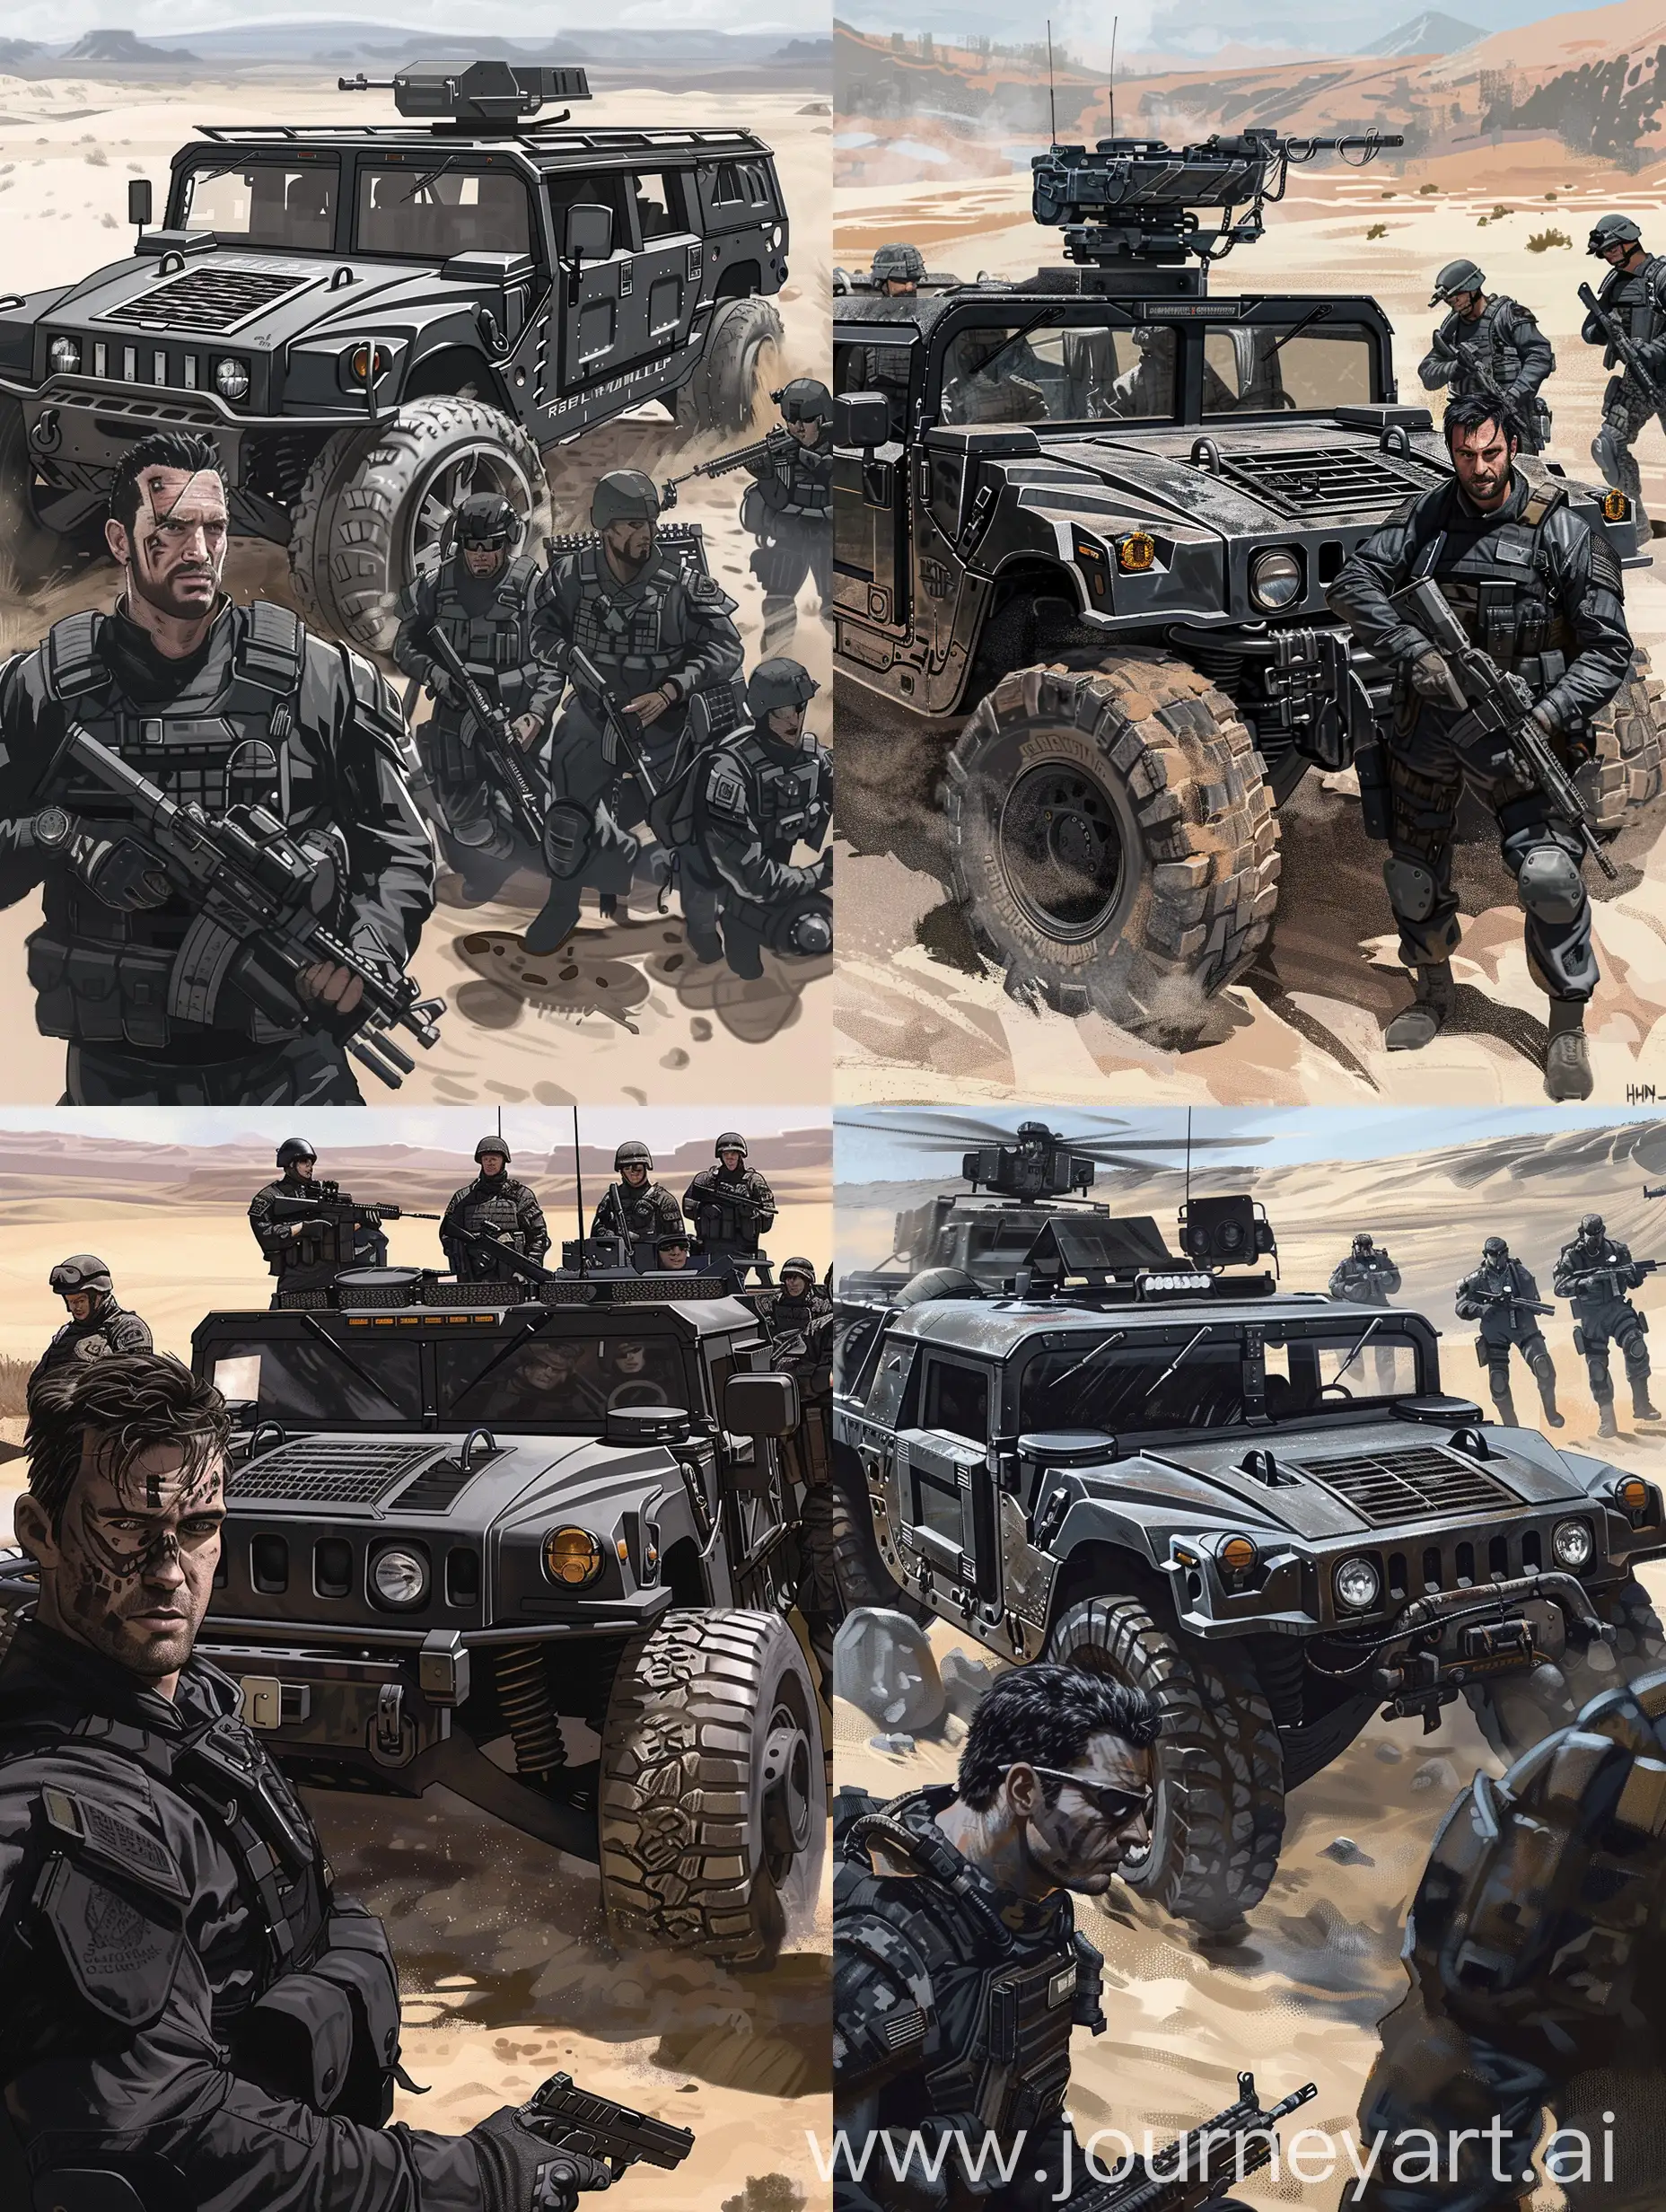 A group of soldiers dressed in black and in front of them Josh Dummel is wearing a black military uniform and has a gun in his hand, in the background the Rescue H2 HUMMER car has a black military design, black and gray color predominance, the soldiers' vehicle is the H2 HUMMER rescue car, drawn in Concept art style, desert view in the background, daytime, There is iron armor in front of the H2 Hummer, the vehicle wheels are large tires with thick treads, the vehicle is high, Josh Dummel is in the foreground as a soldier, there are 3 soldiers behind him.    https://i.hizliresim.com/aaxjxcu.png